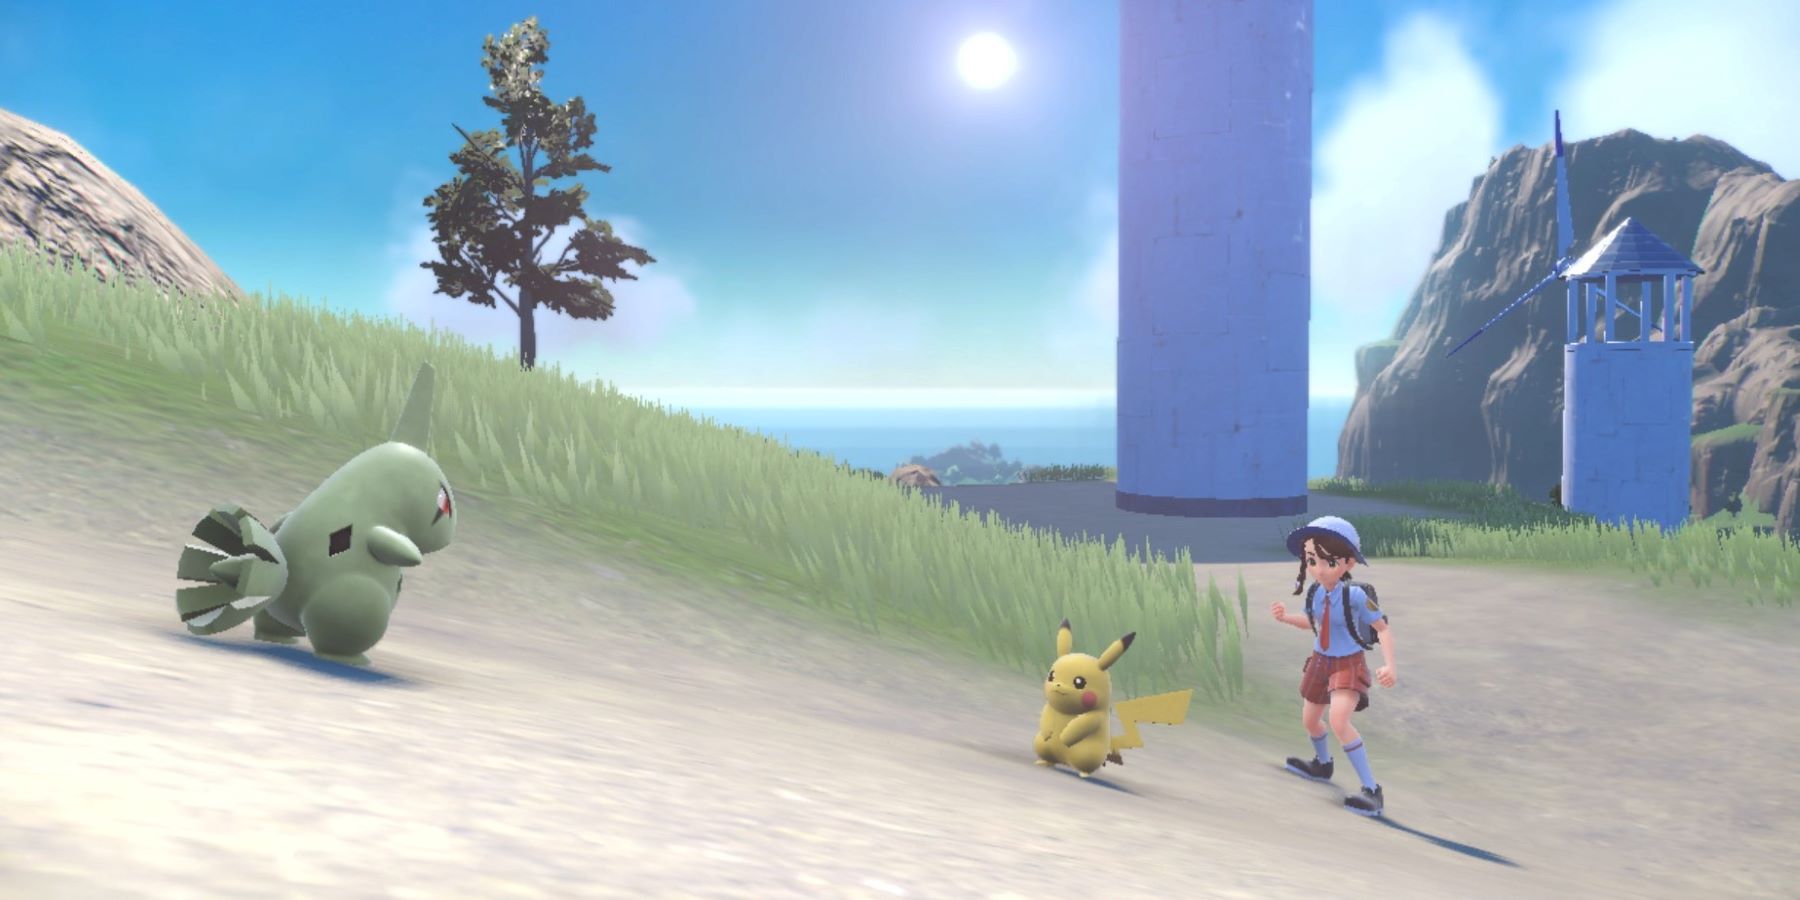 A Pokemon Trainer battling against a Larvitar with a Pikachu in Pokemon Scarlet and Violet